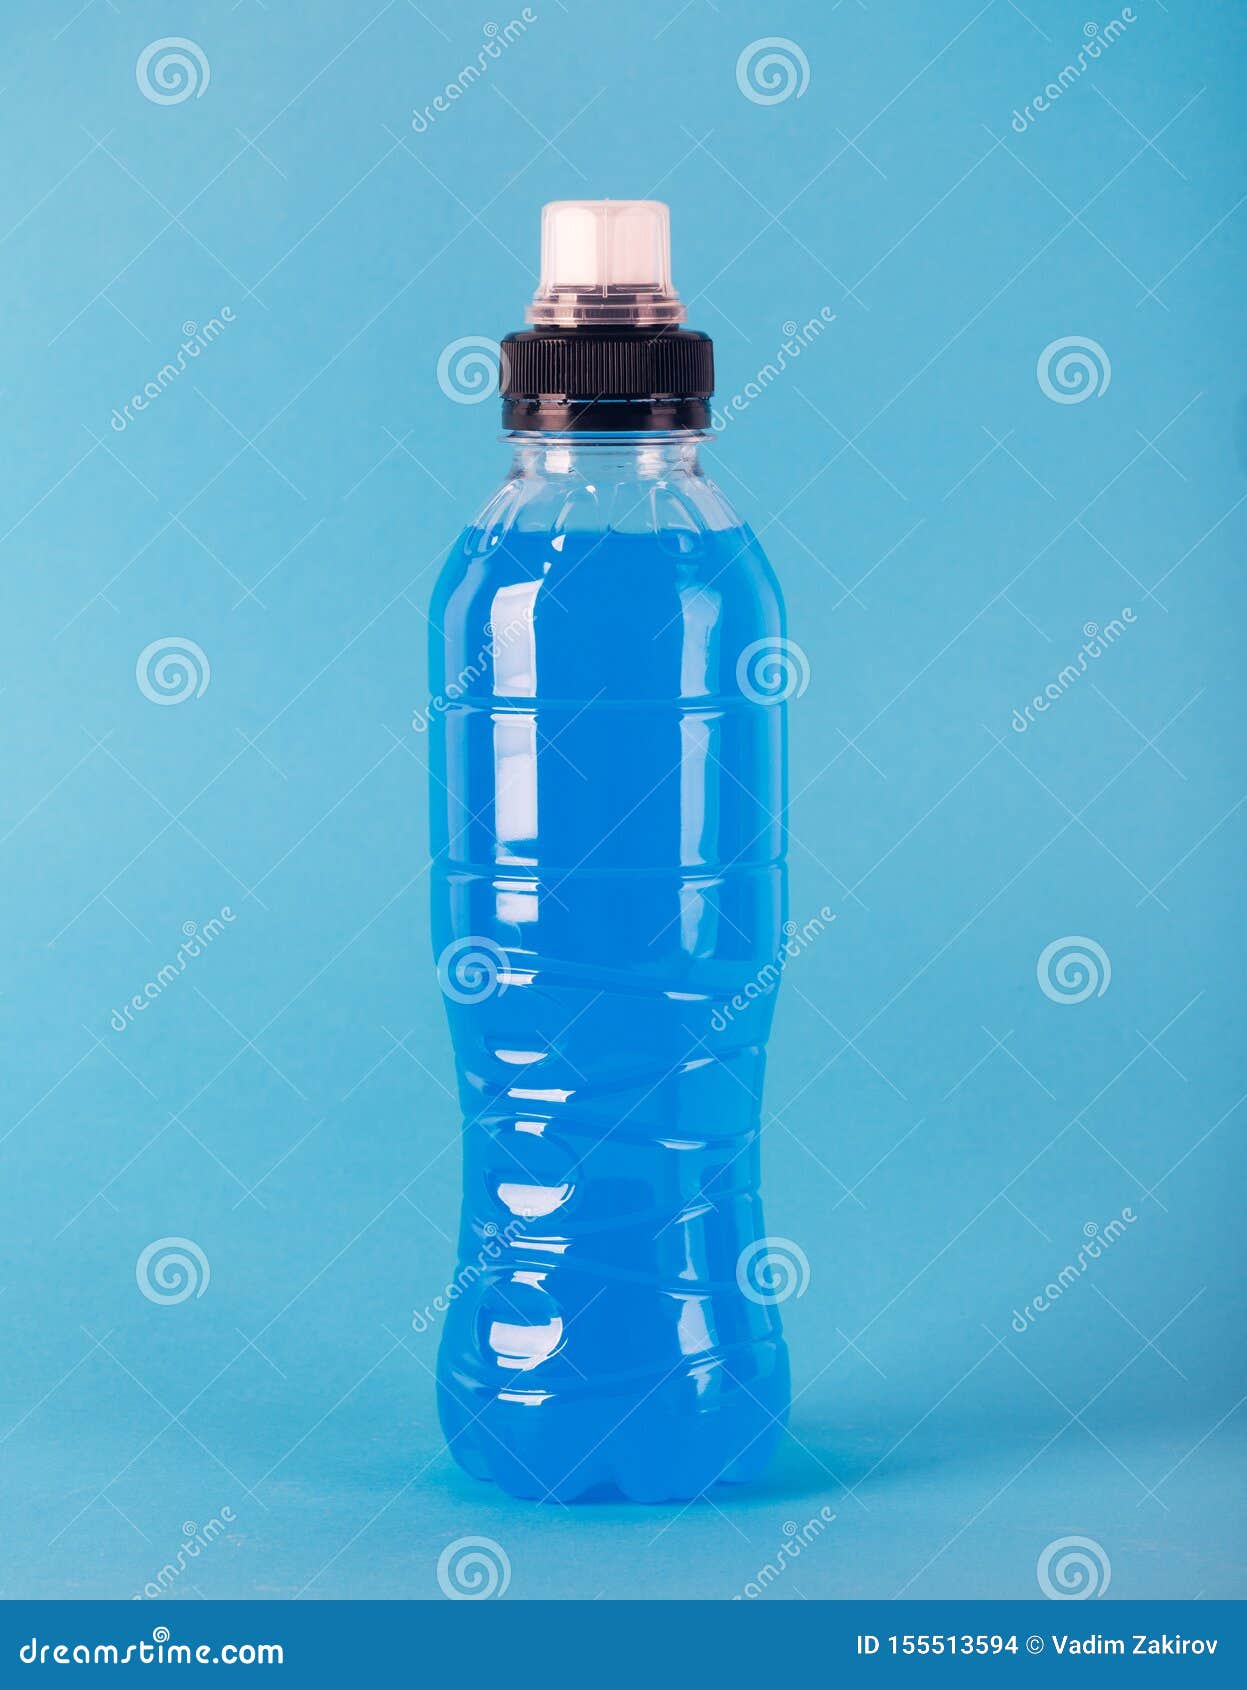 Isotonic Energy Drink Bottle With Blue Transparent Liquid Sport Beverage On A Colorful Background Stock Photo Image Of Athlete Blue